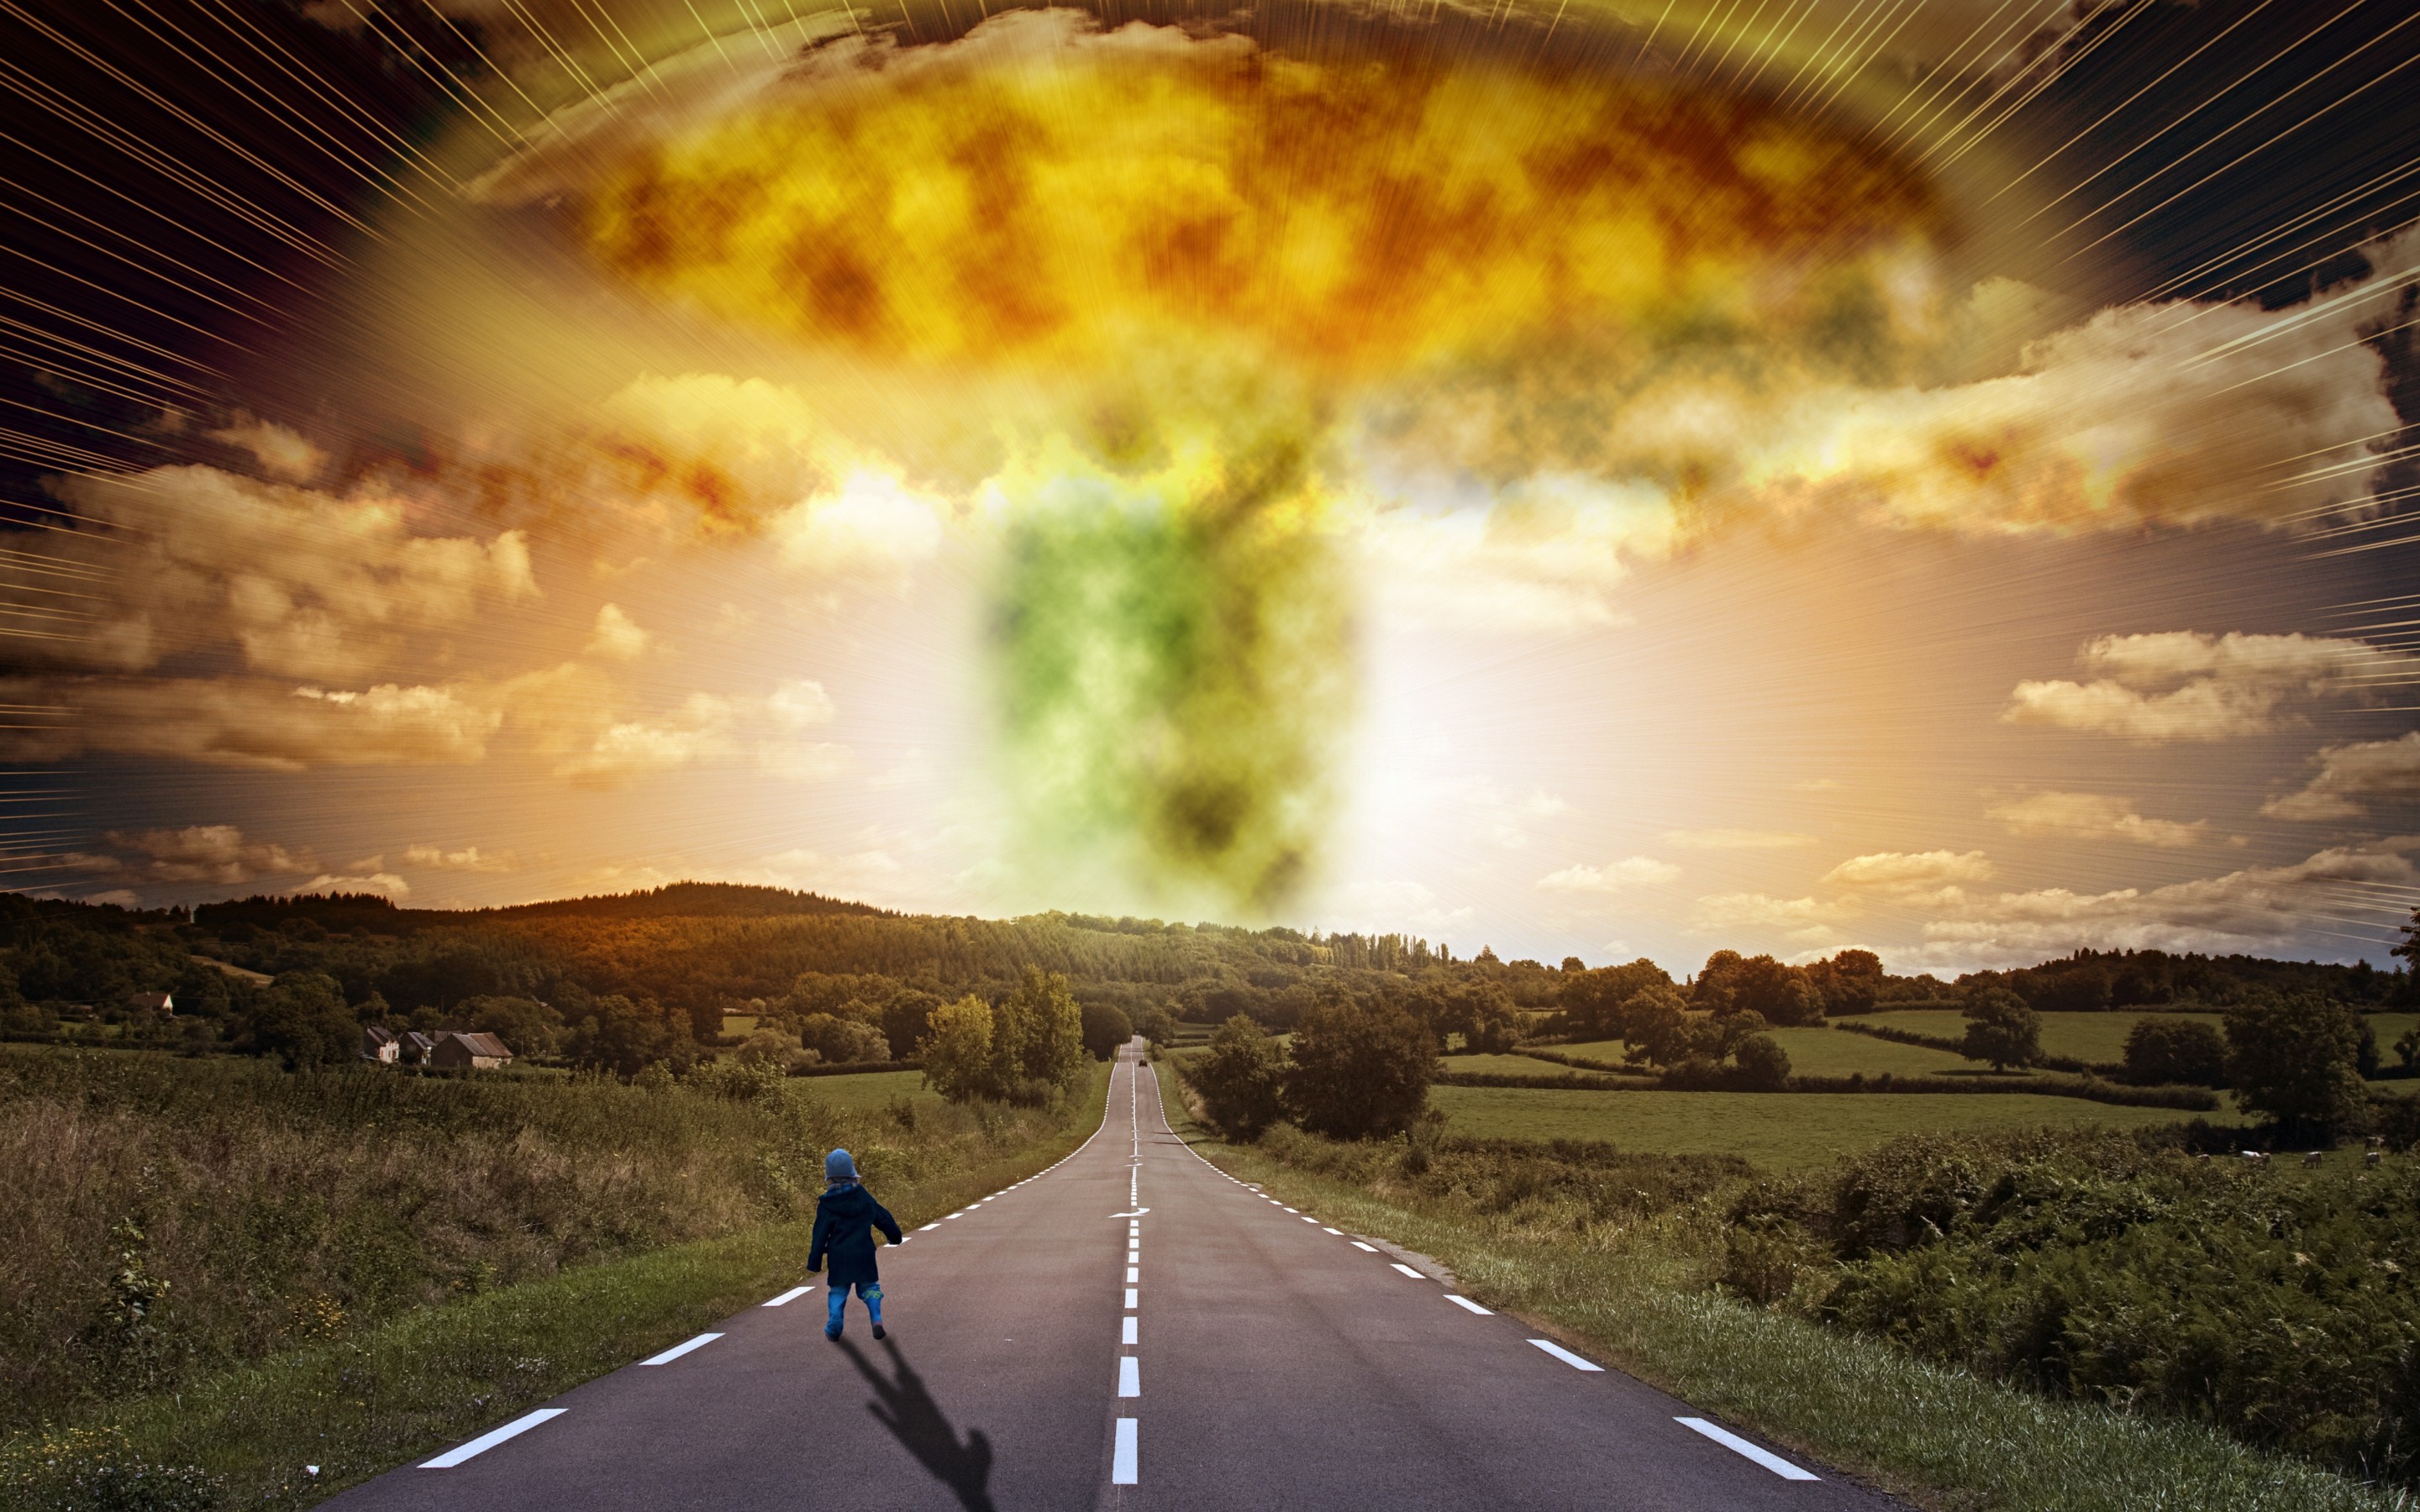 2880x1800 radiation, houses, signs, nuclear, child, explosion, trees, peace, hd images,  best humor images, apocalyptic, bomb, apocalypse,road,free images hd free  ...